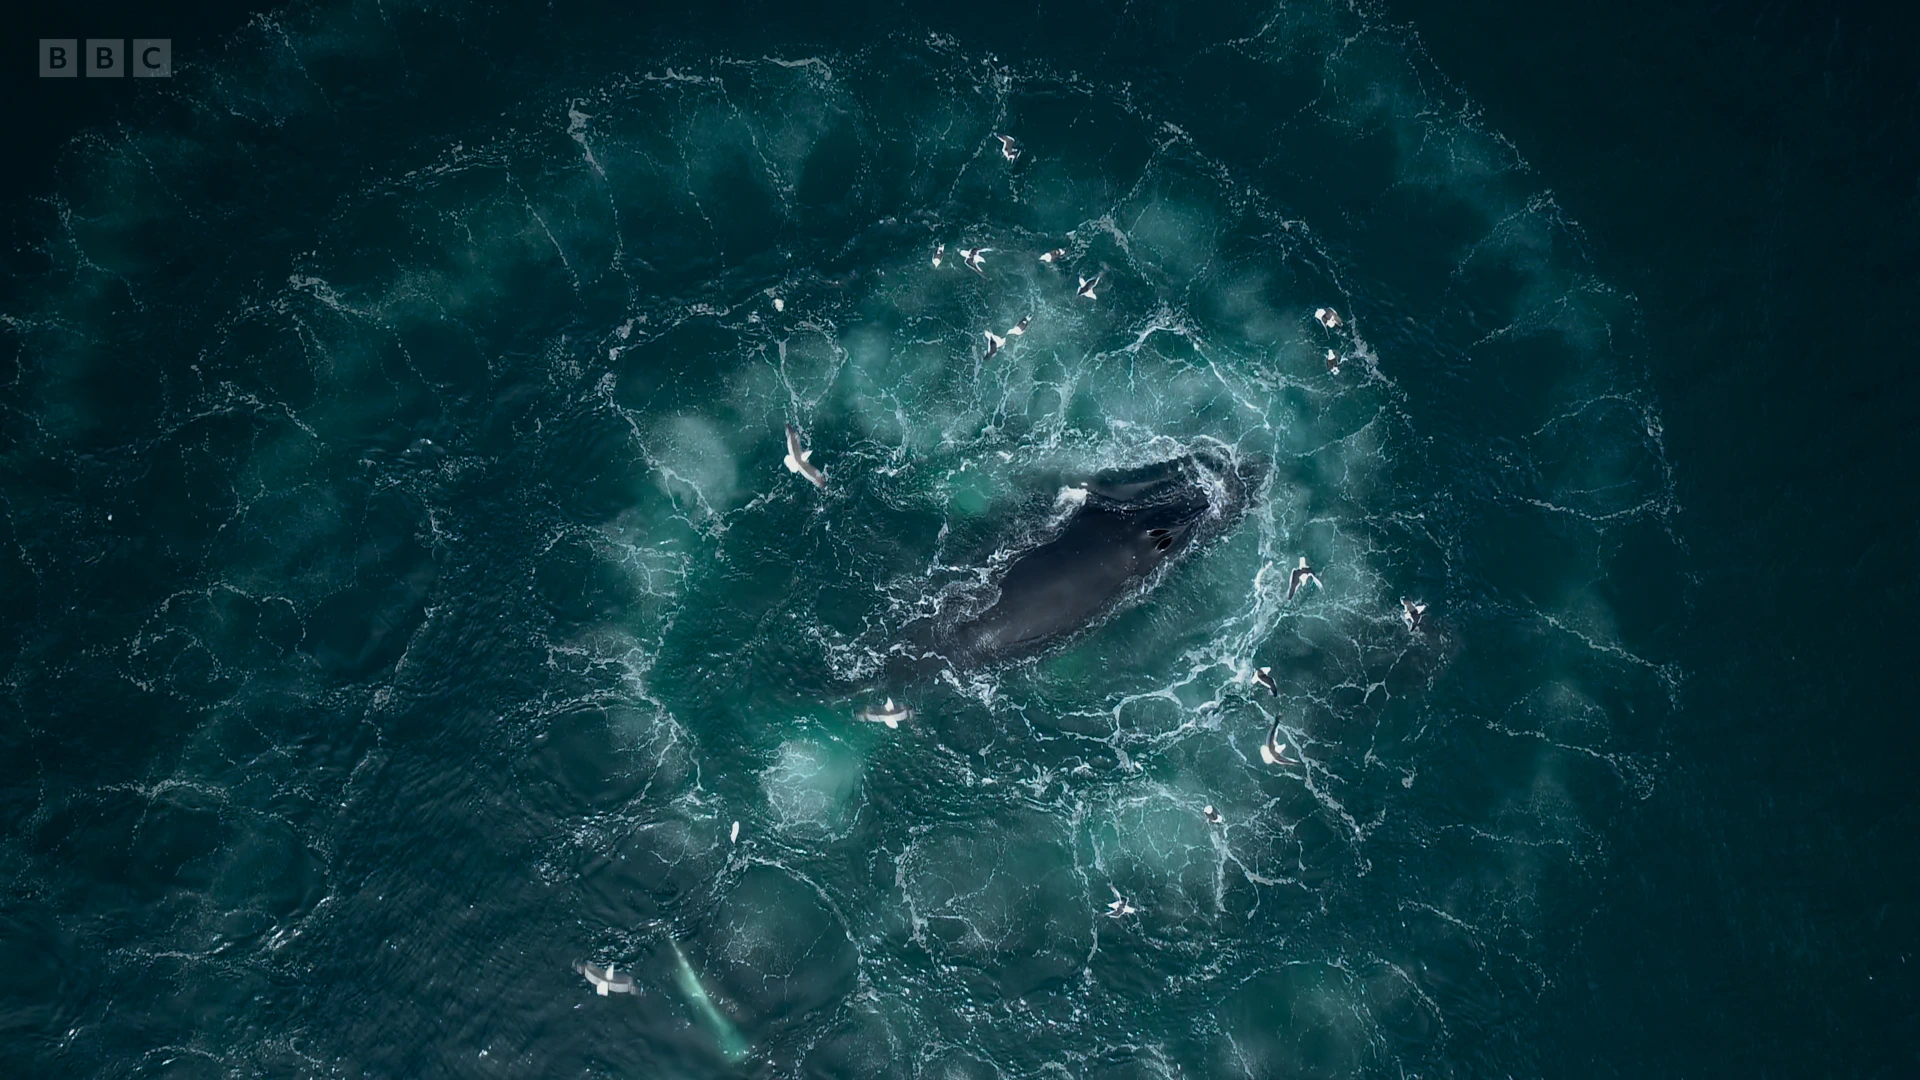 Humpback whale (Megaptera novaeangliae) as shown in Seven Worlds, One Planet - Antarctica